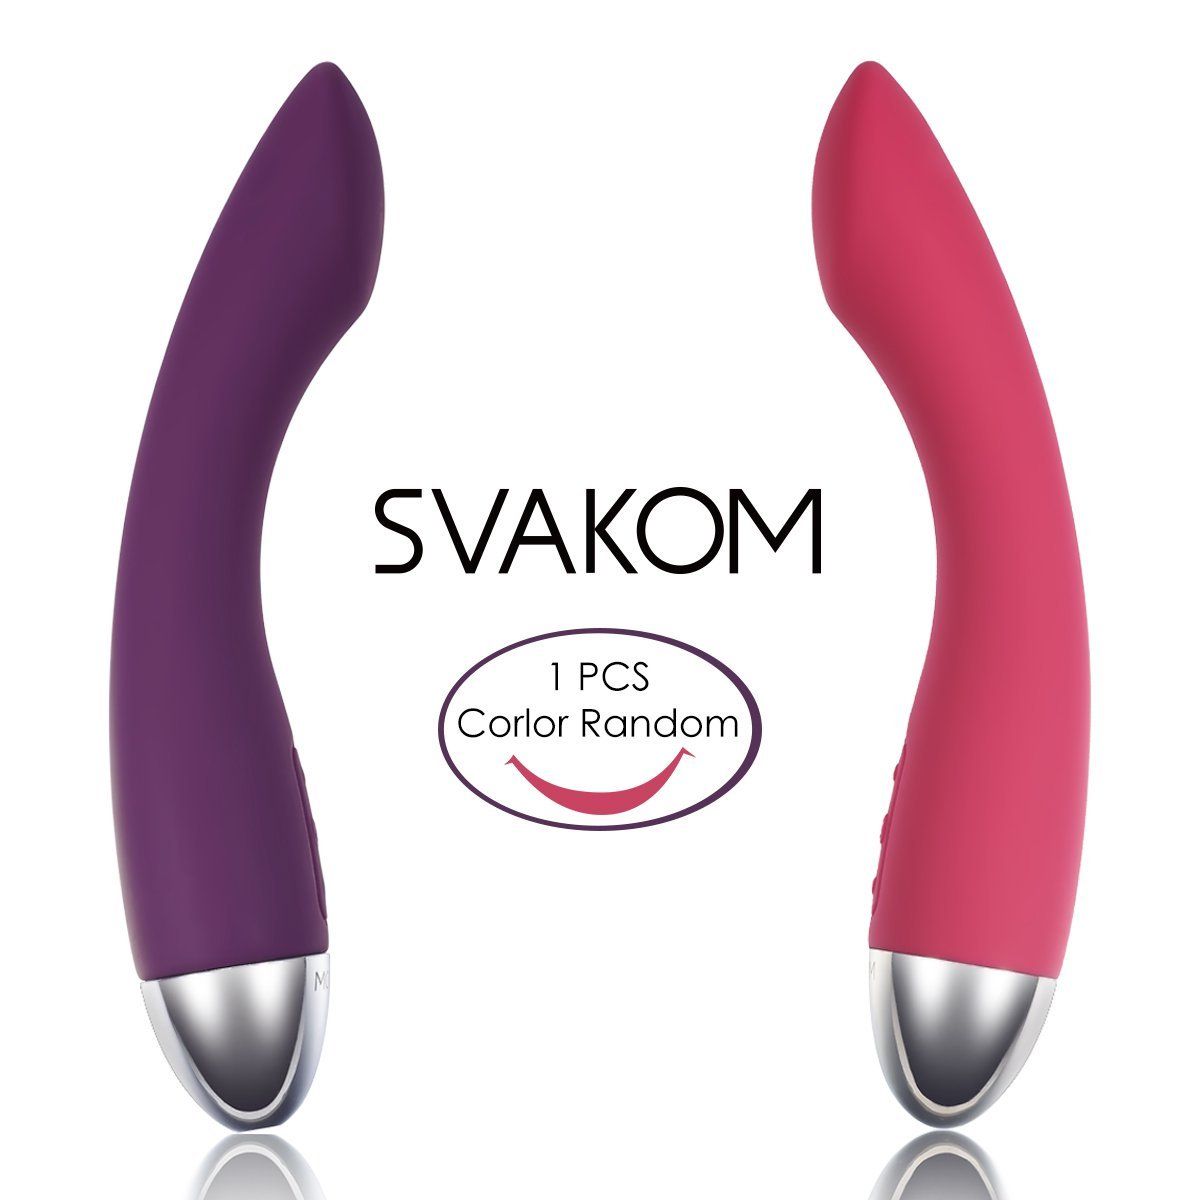 Which vibrator should i buy